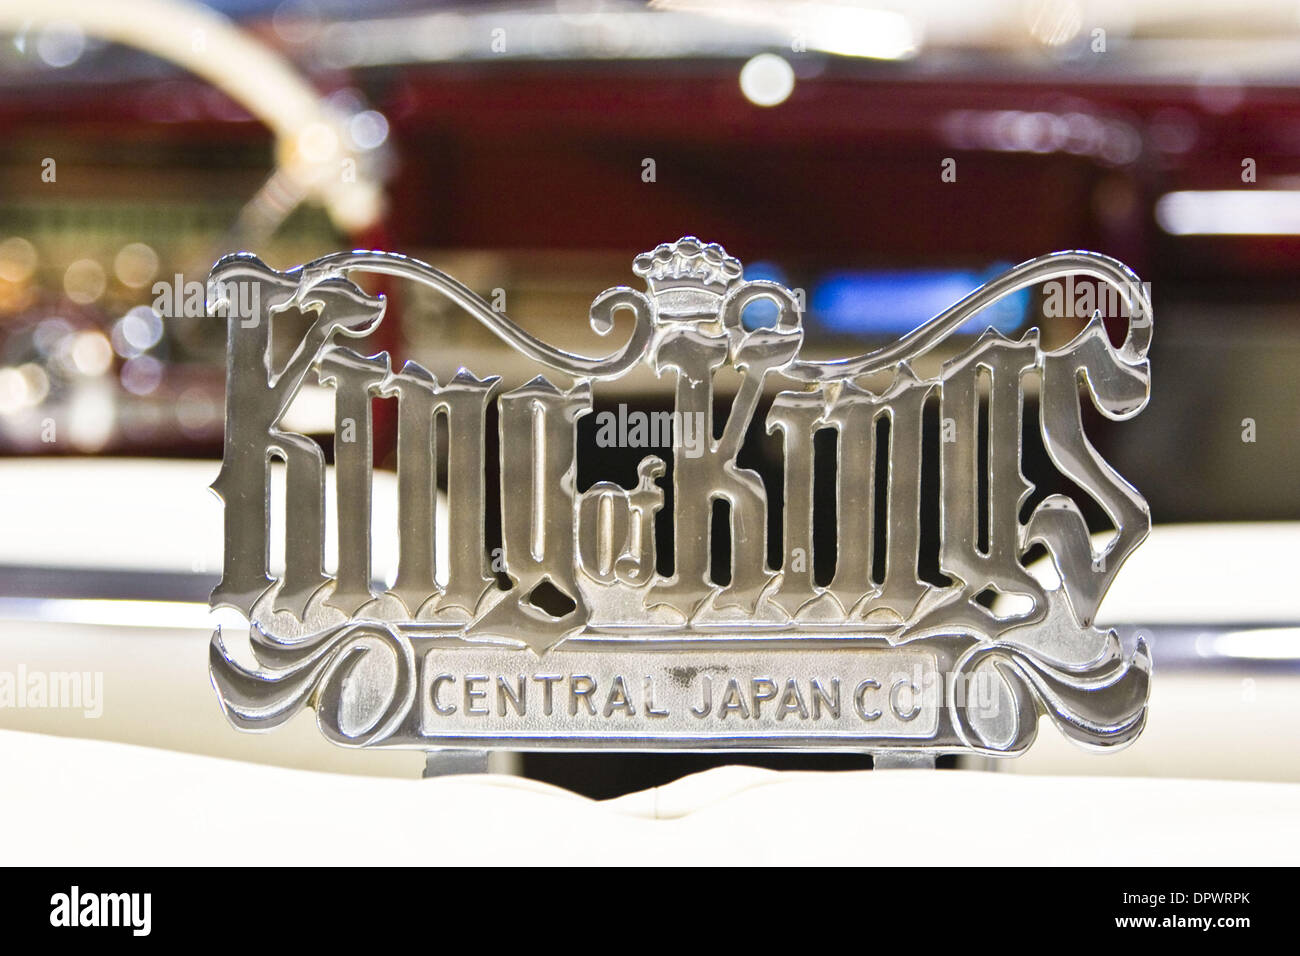 Nov 25, 2008 - Chiba, Japan - A Japanese car club, 'King of Kings' logo is displayed at the Lowrider Japan Car Show which took place at Makuhari Messe Convention Center in Chiba, Japan. (Credit Image: © Christopher Jue/ZUMA Press) Stock Photo